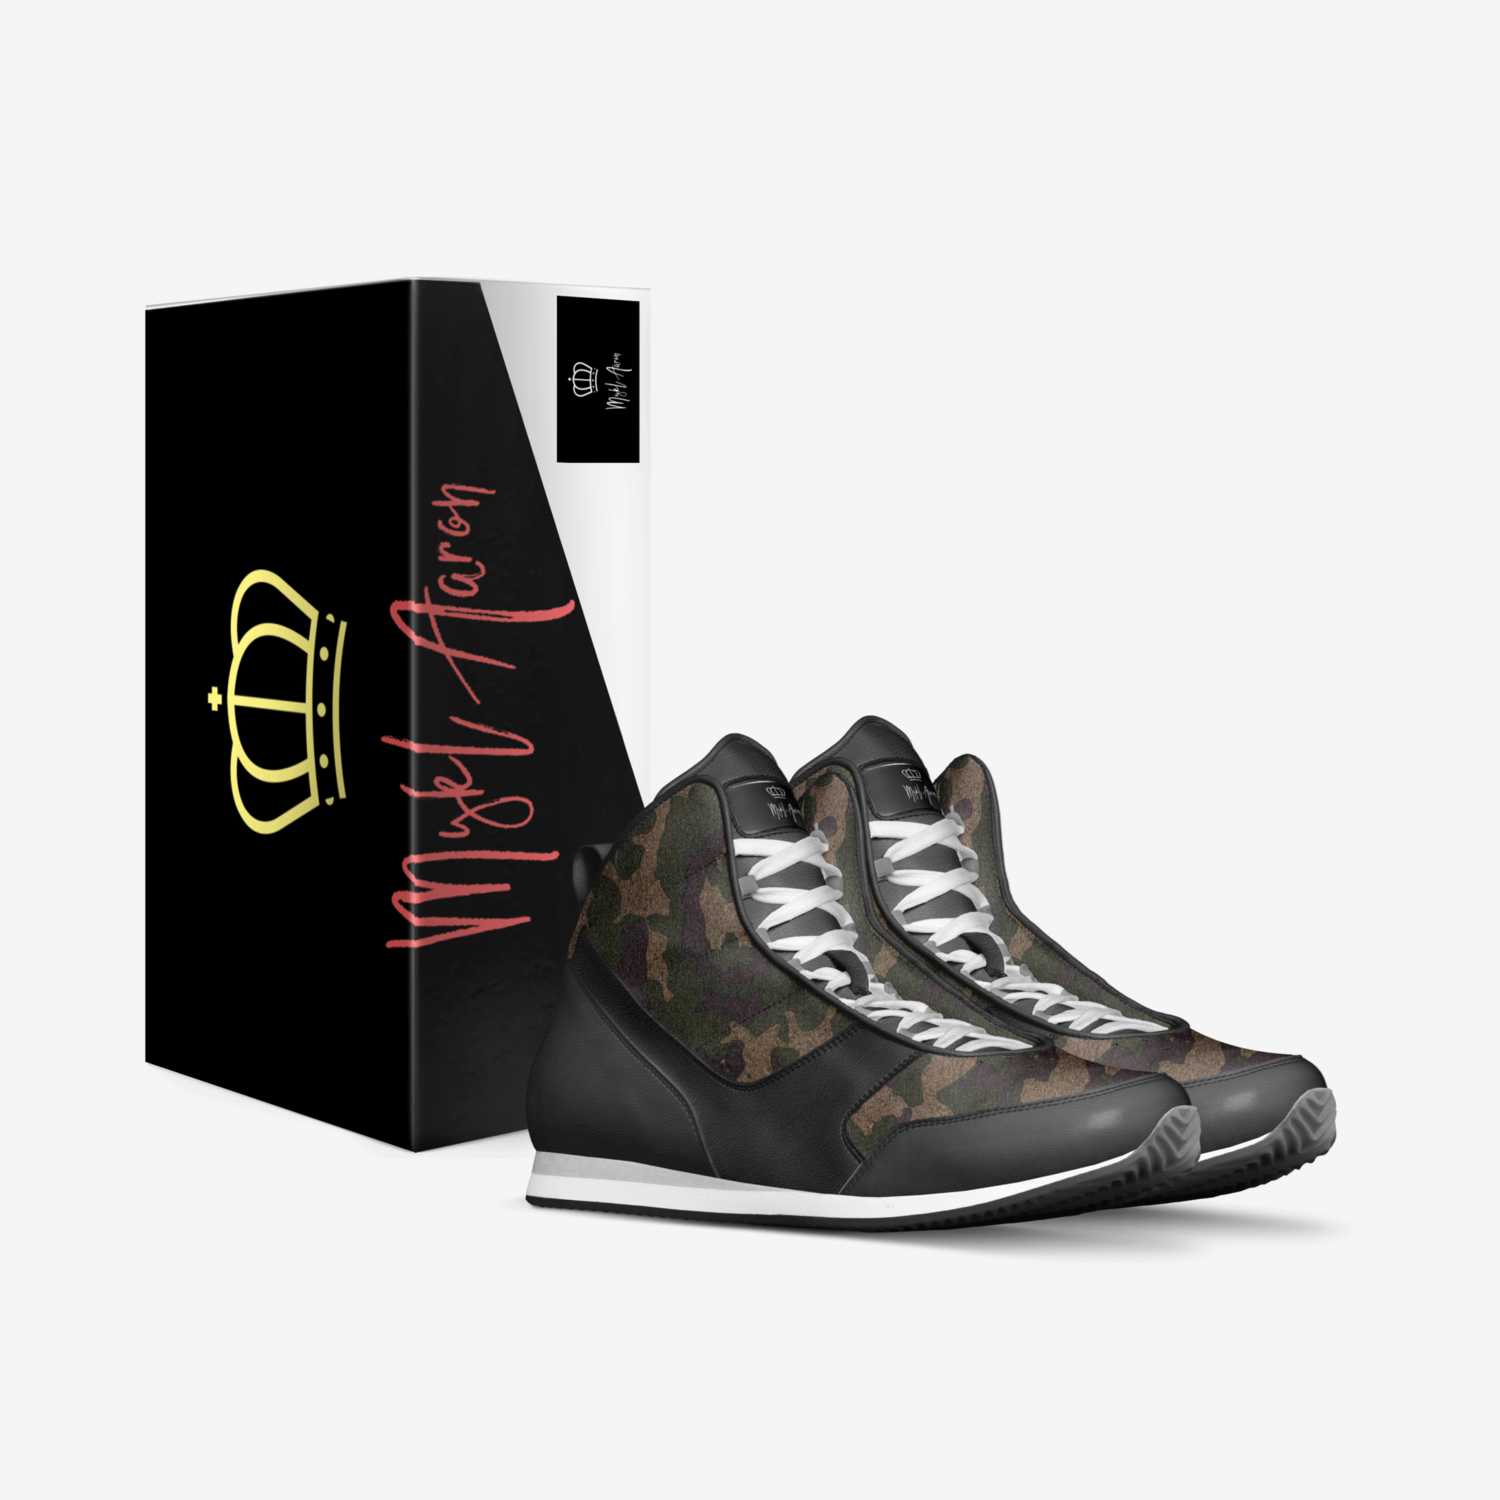 Mykl  Aaron custom made in Italy shoes by Michael Kimbrough | Box view